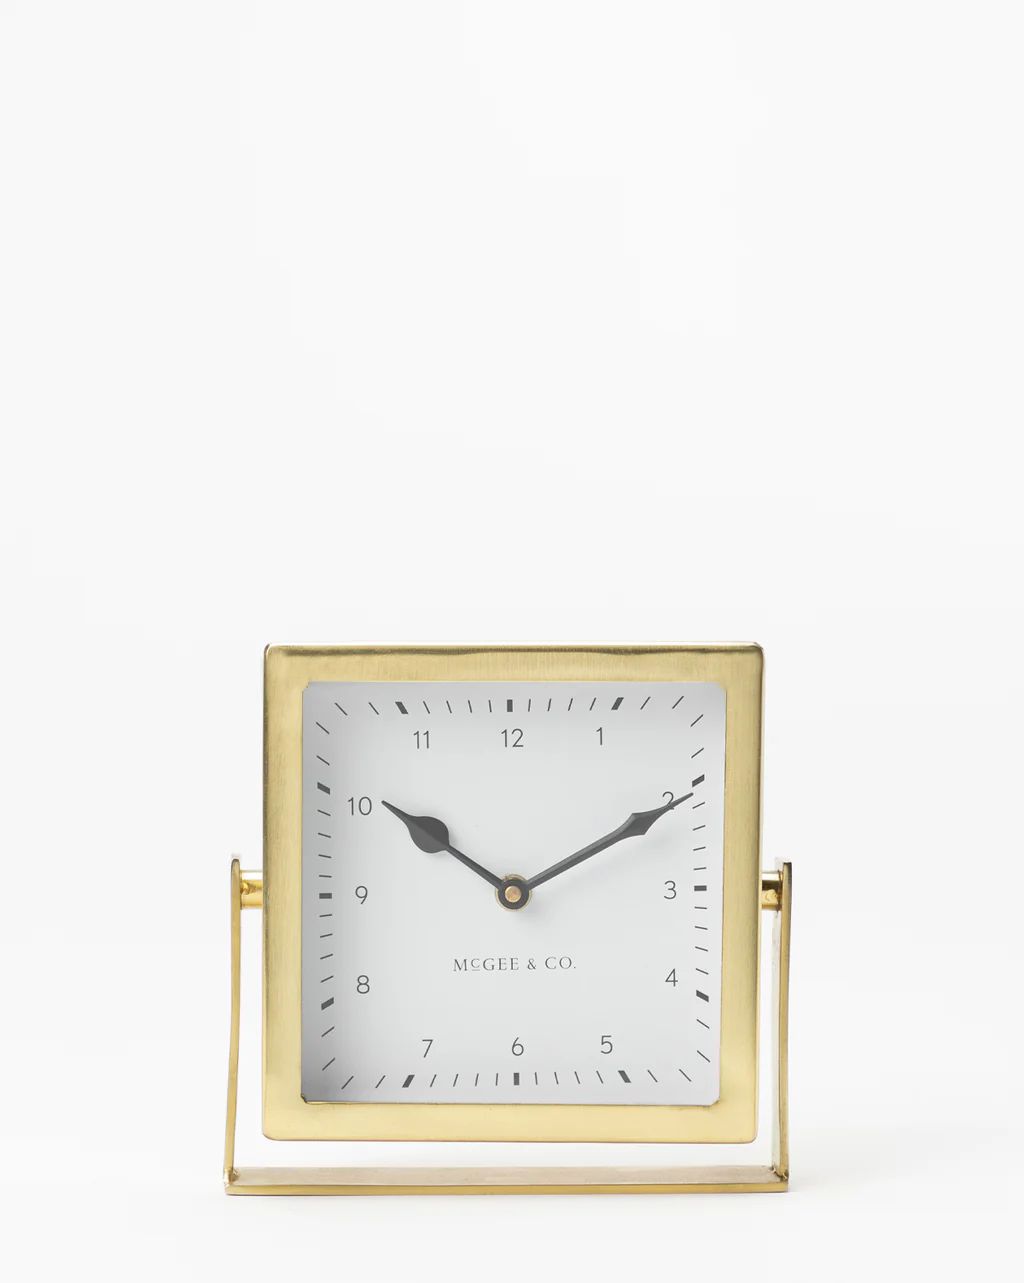 Posey Table Clock | McGee & Co.